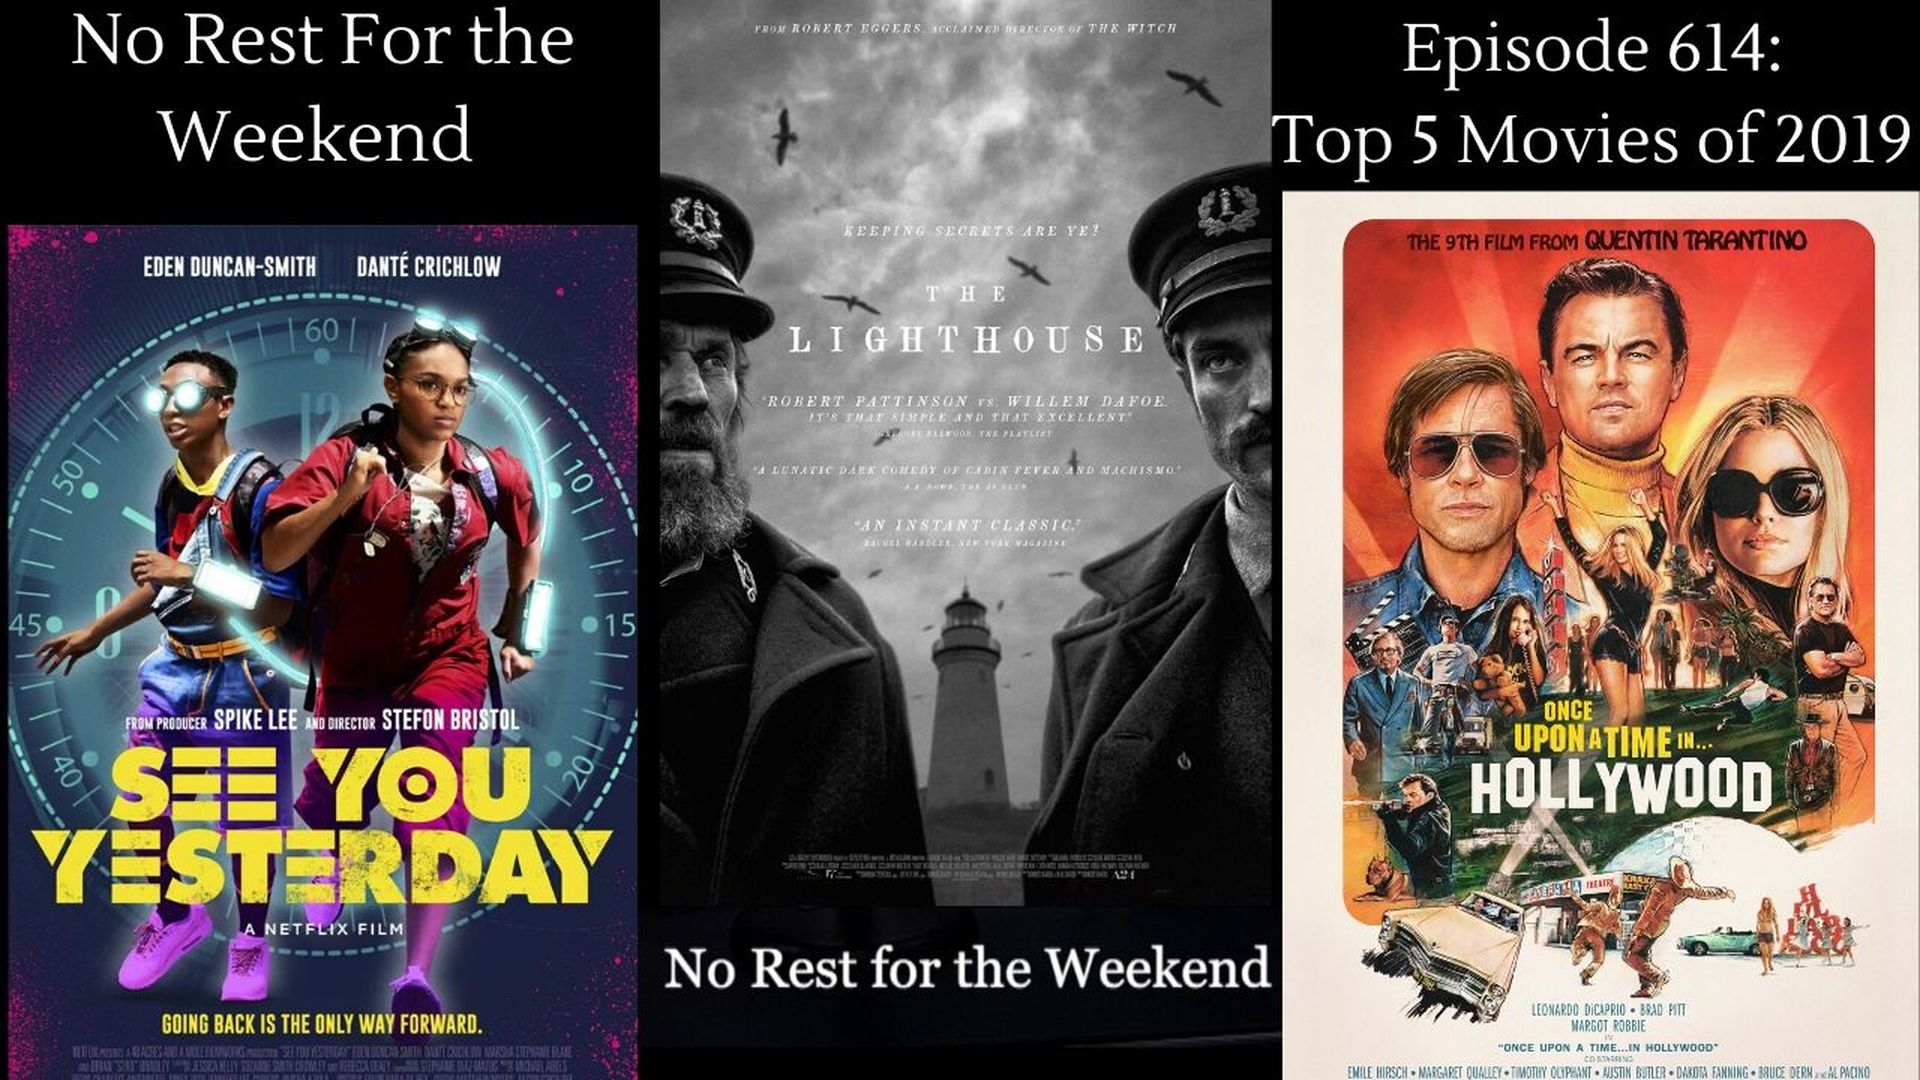 Episode 614: Top 5 Movies of 2019